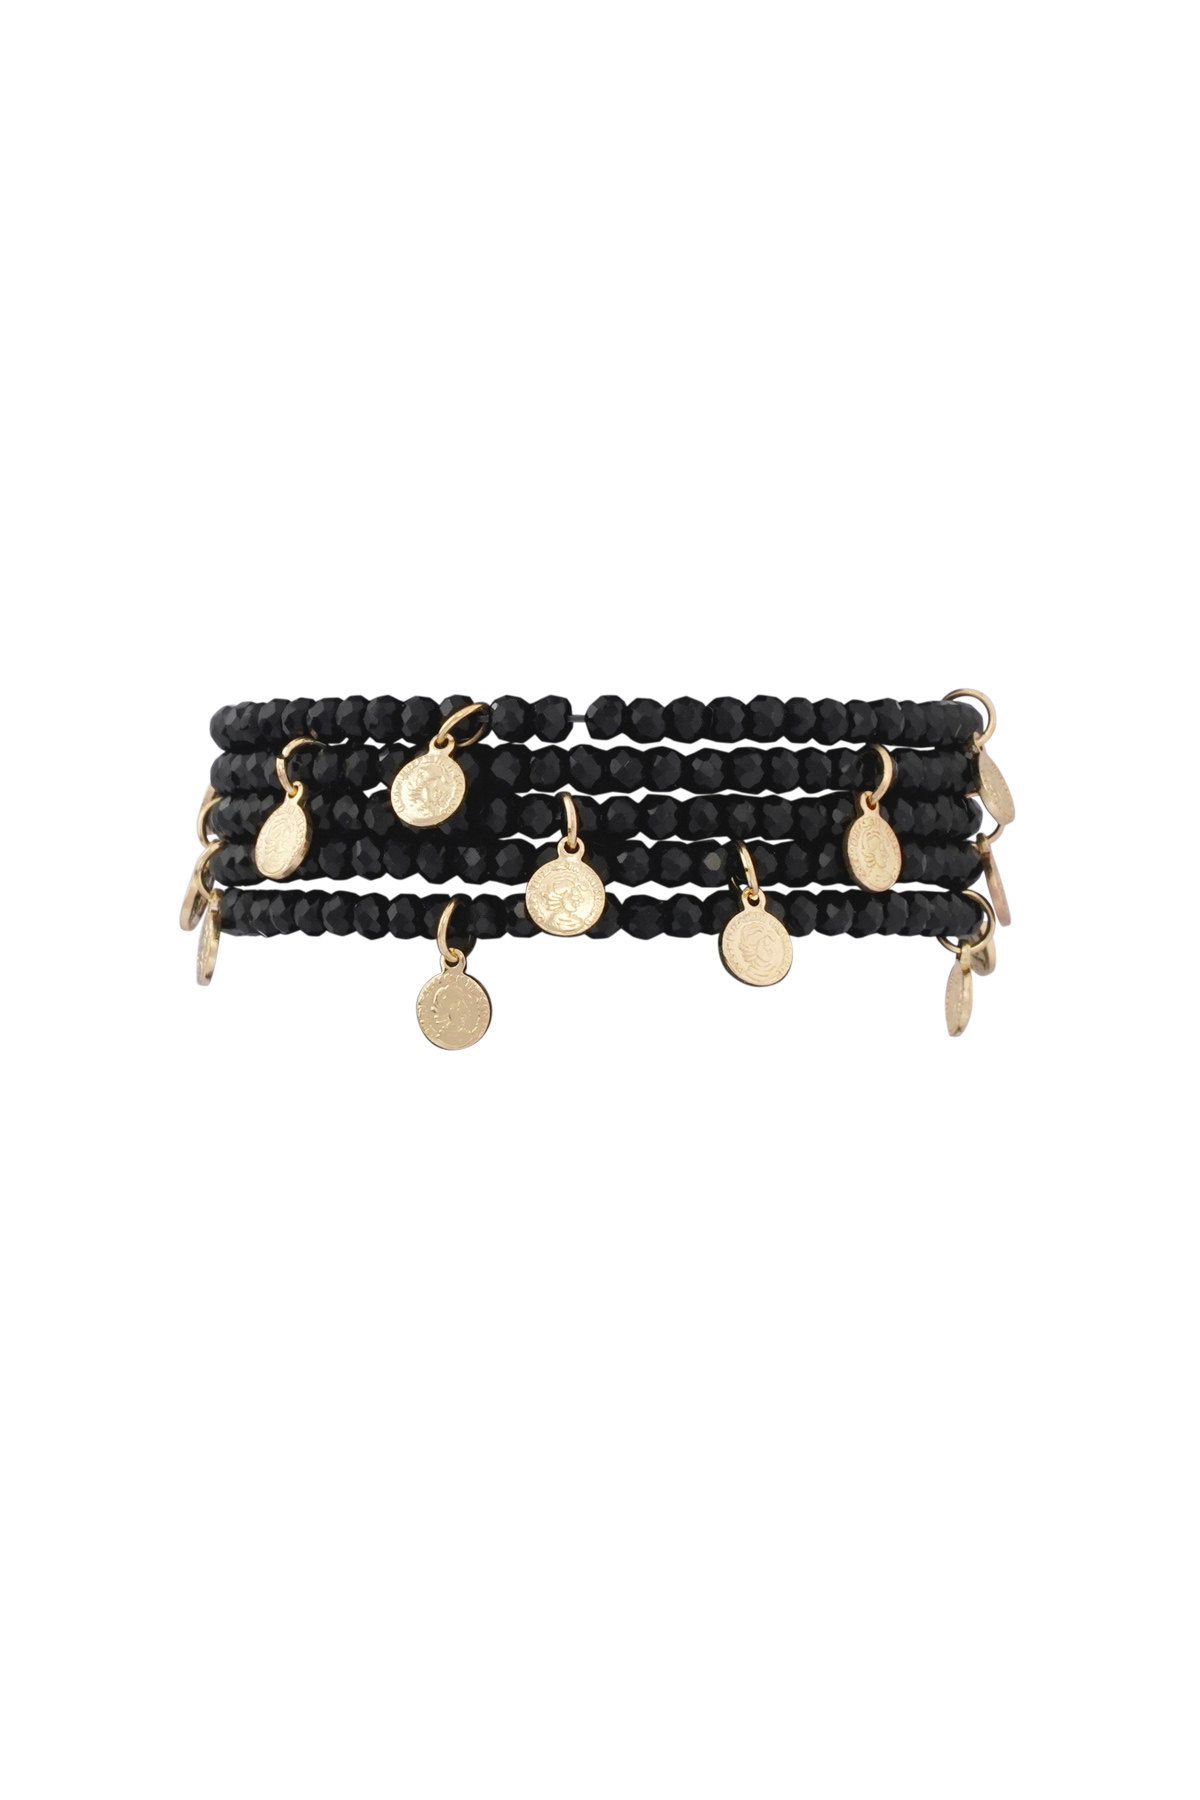 Bracelet with coin charms - black